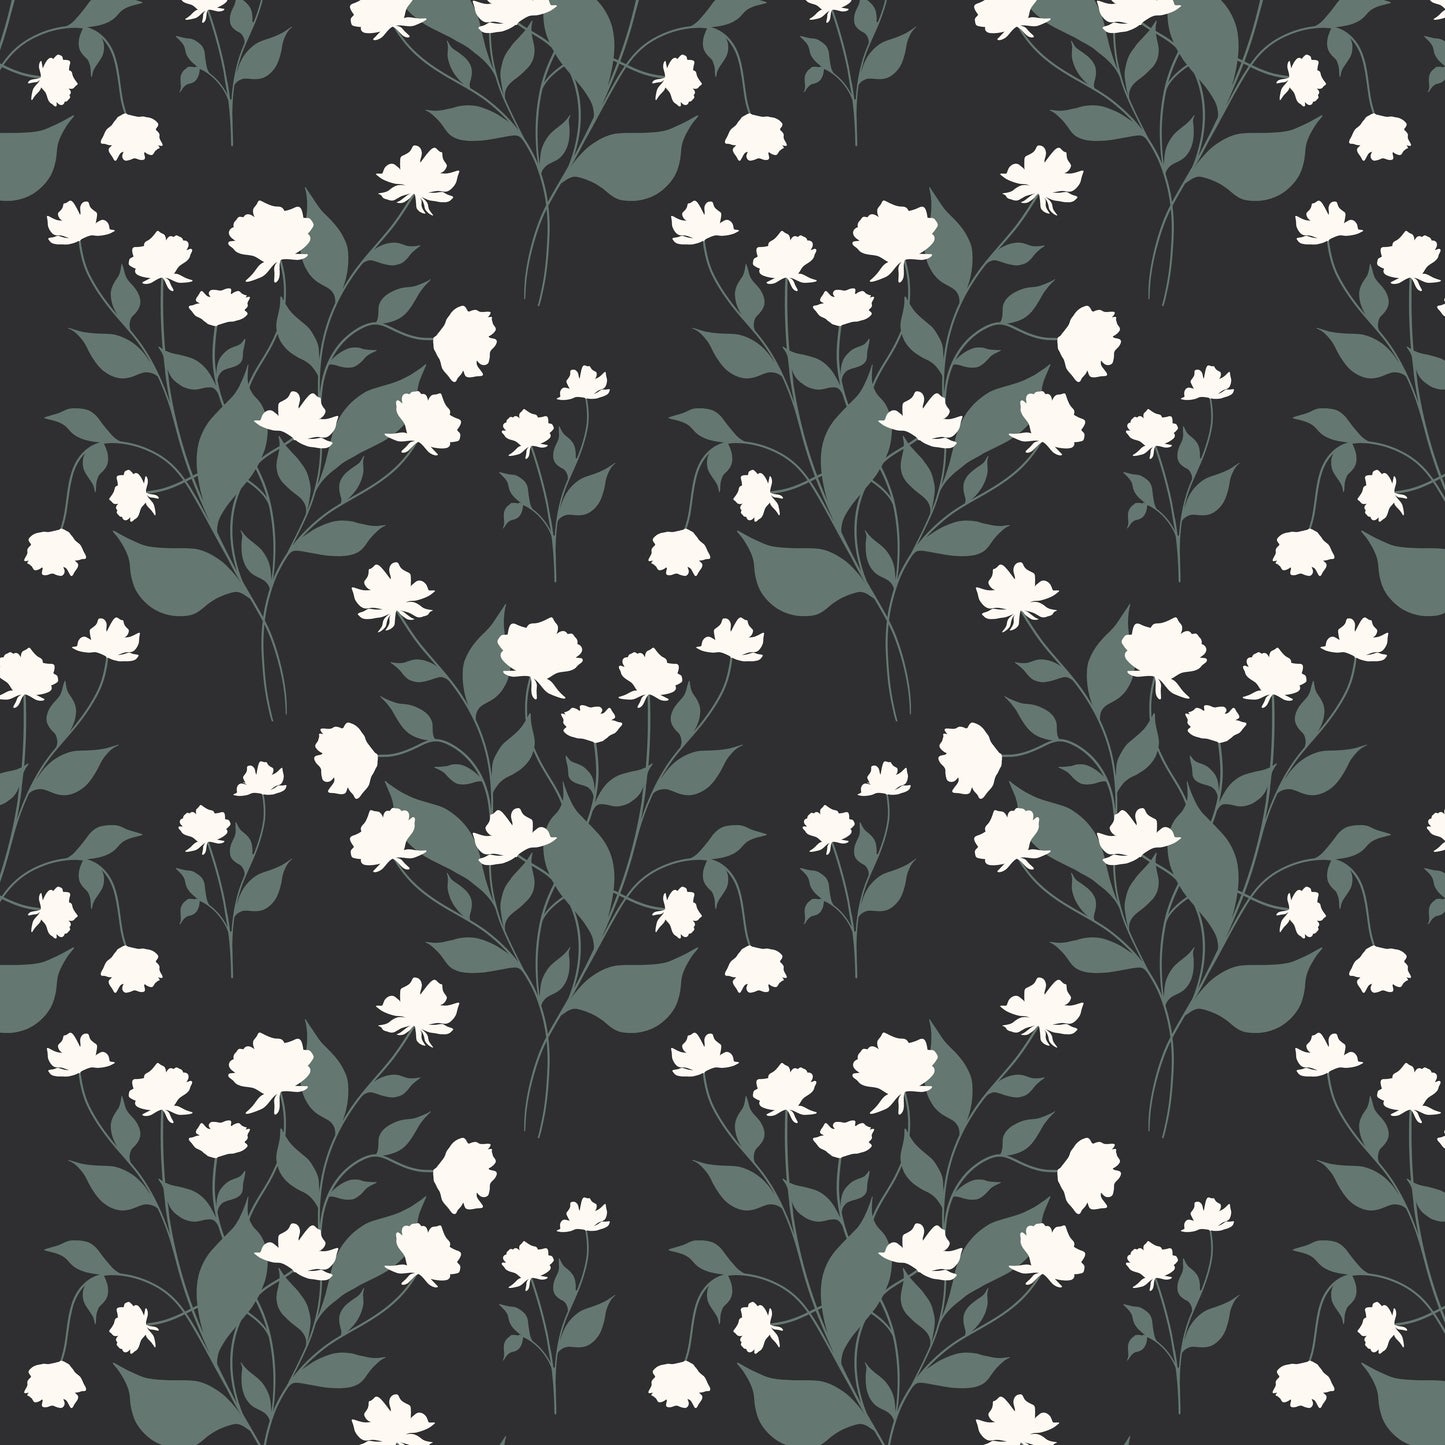 Miriam Wallpaper (Midnight) from The Marlow Collection